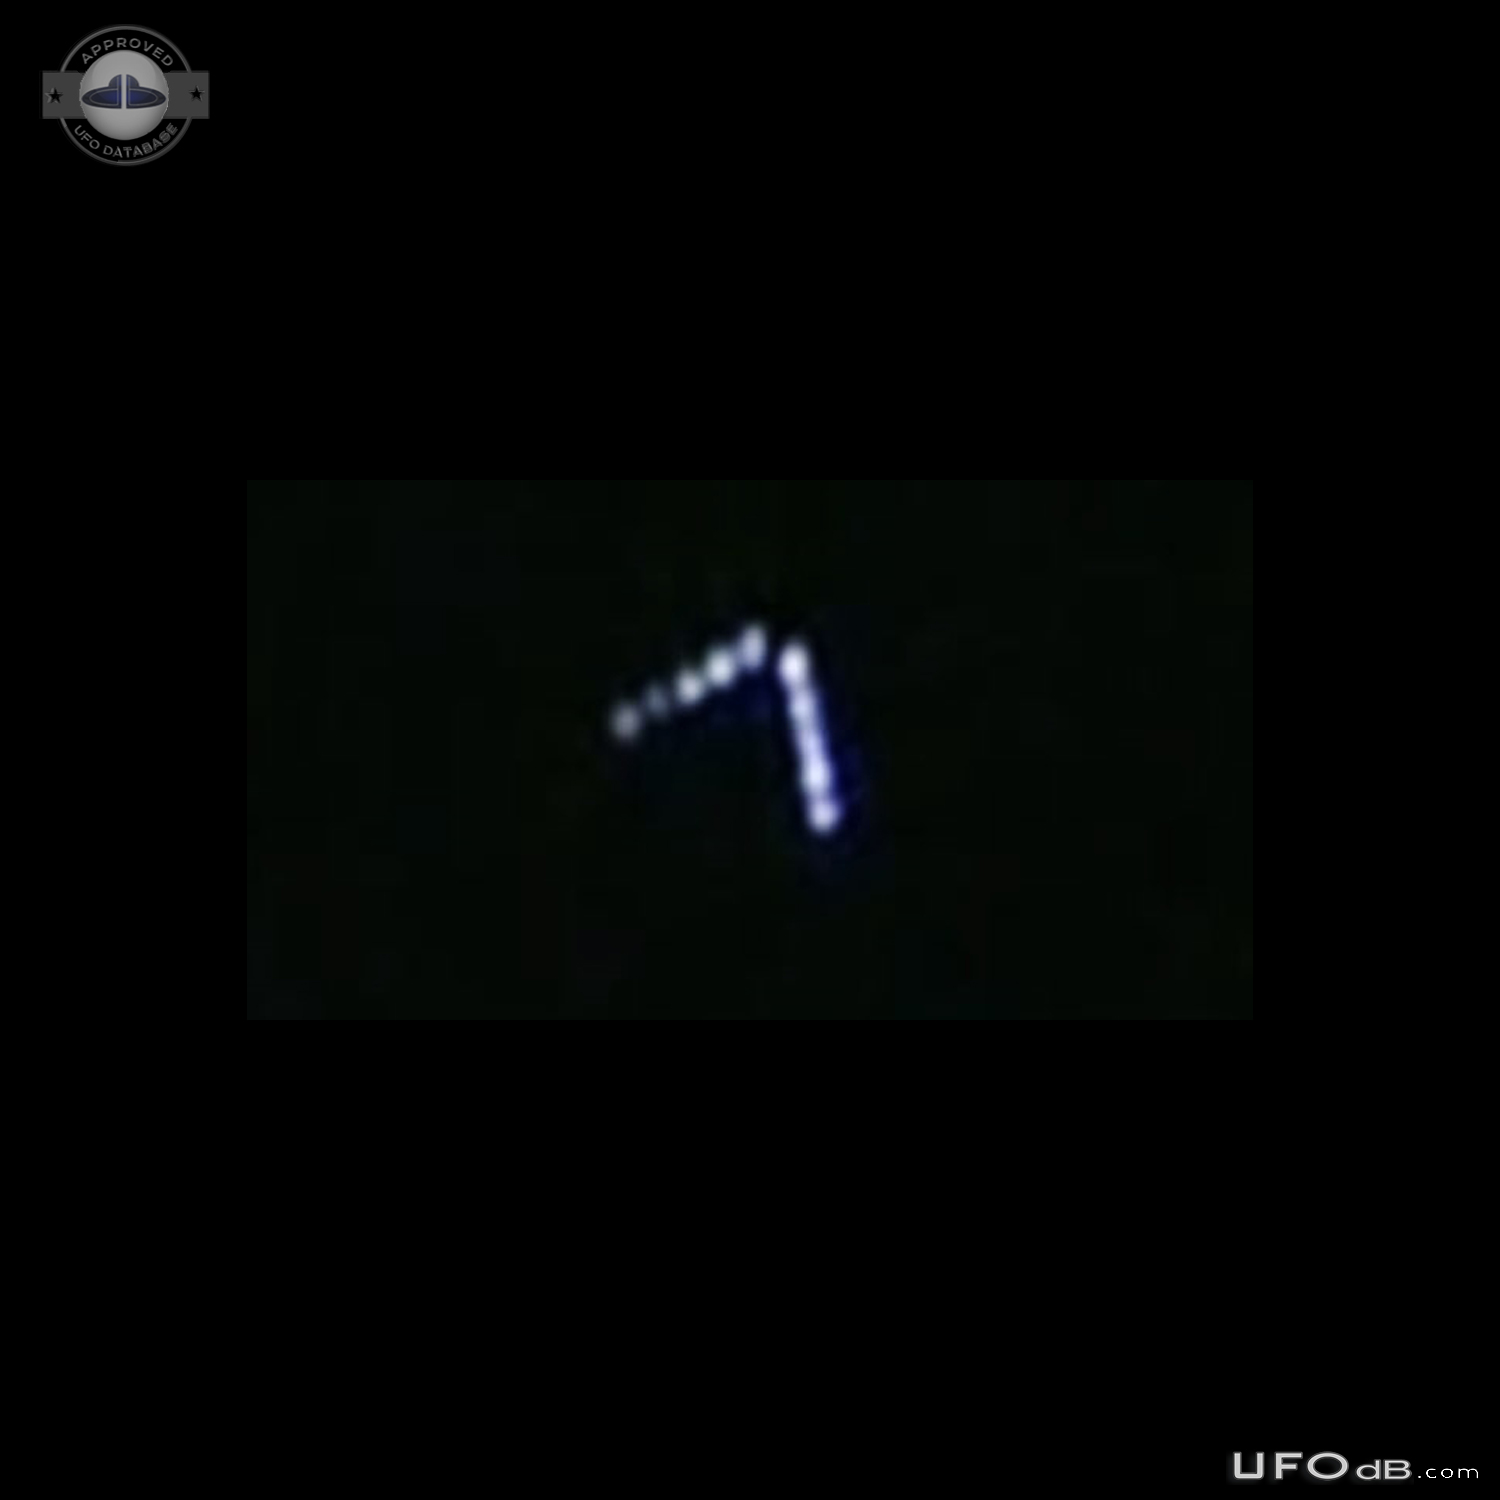 V-Shaped Silent Flying UFO Seen through thin clouds - Lehigh Acres Flo UFO Picture #735-1